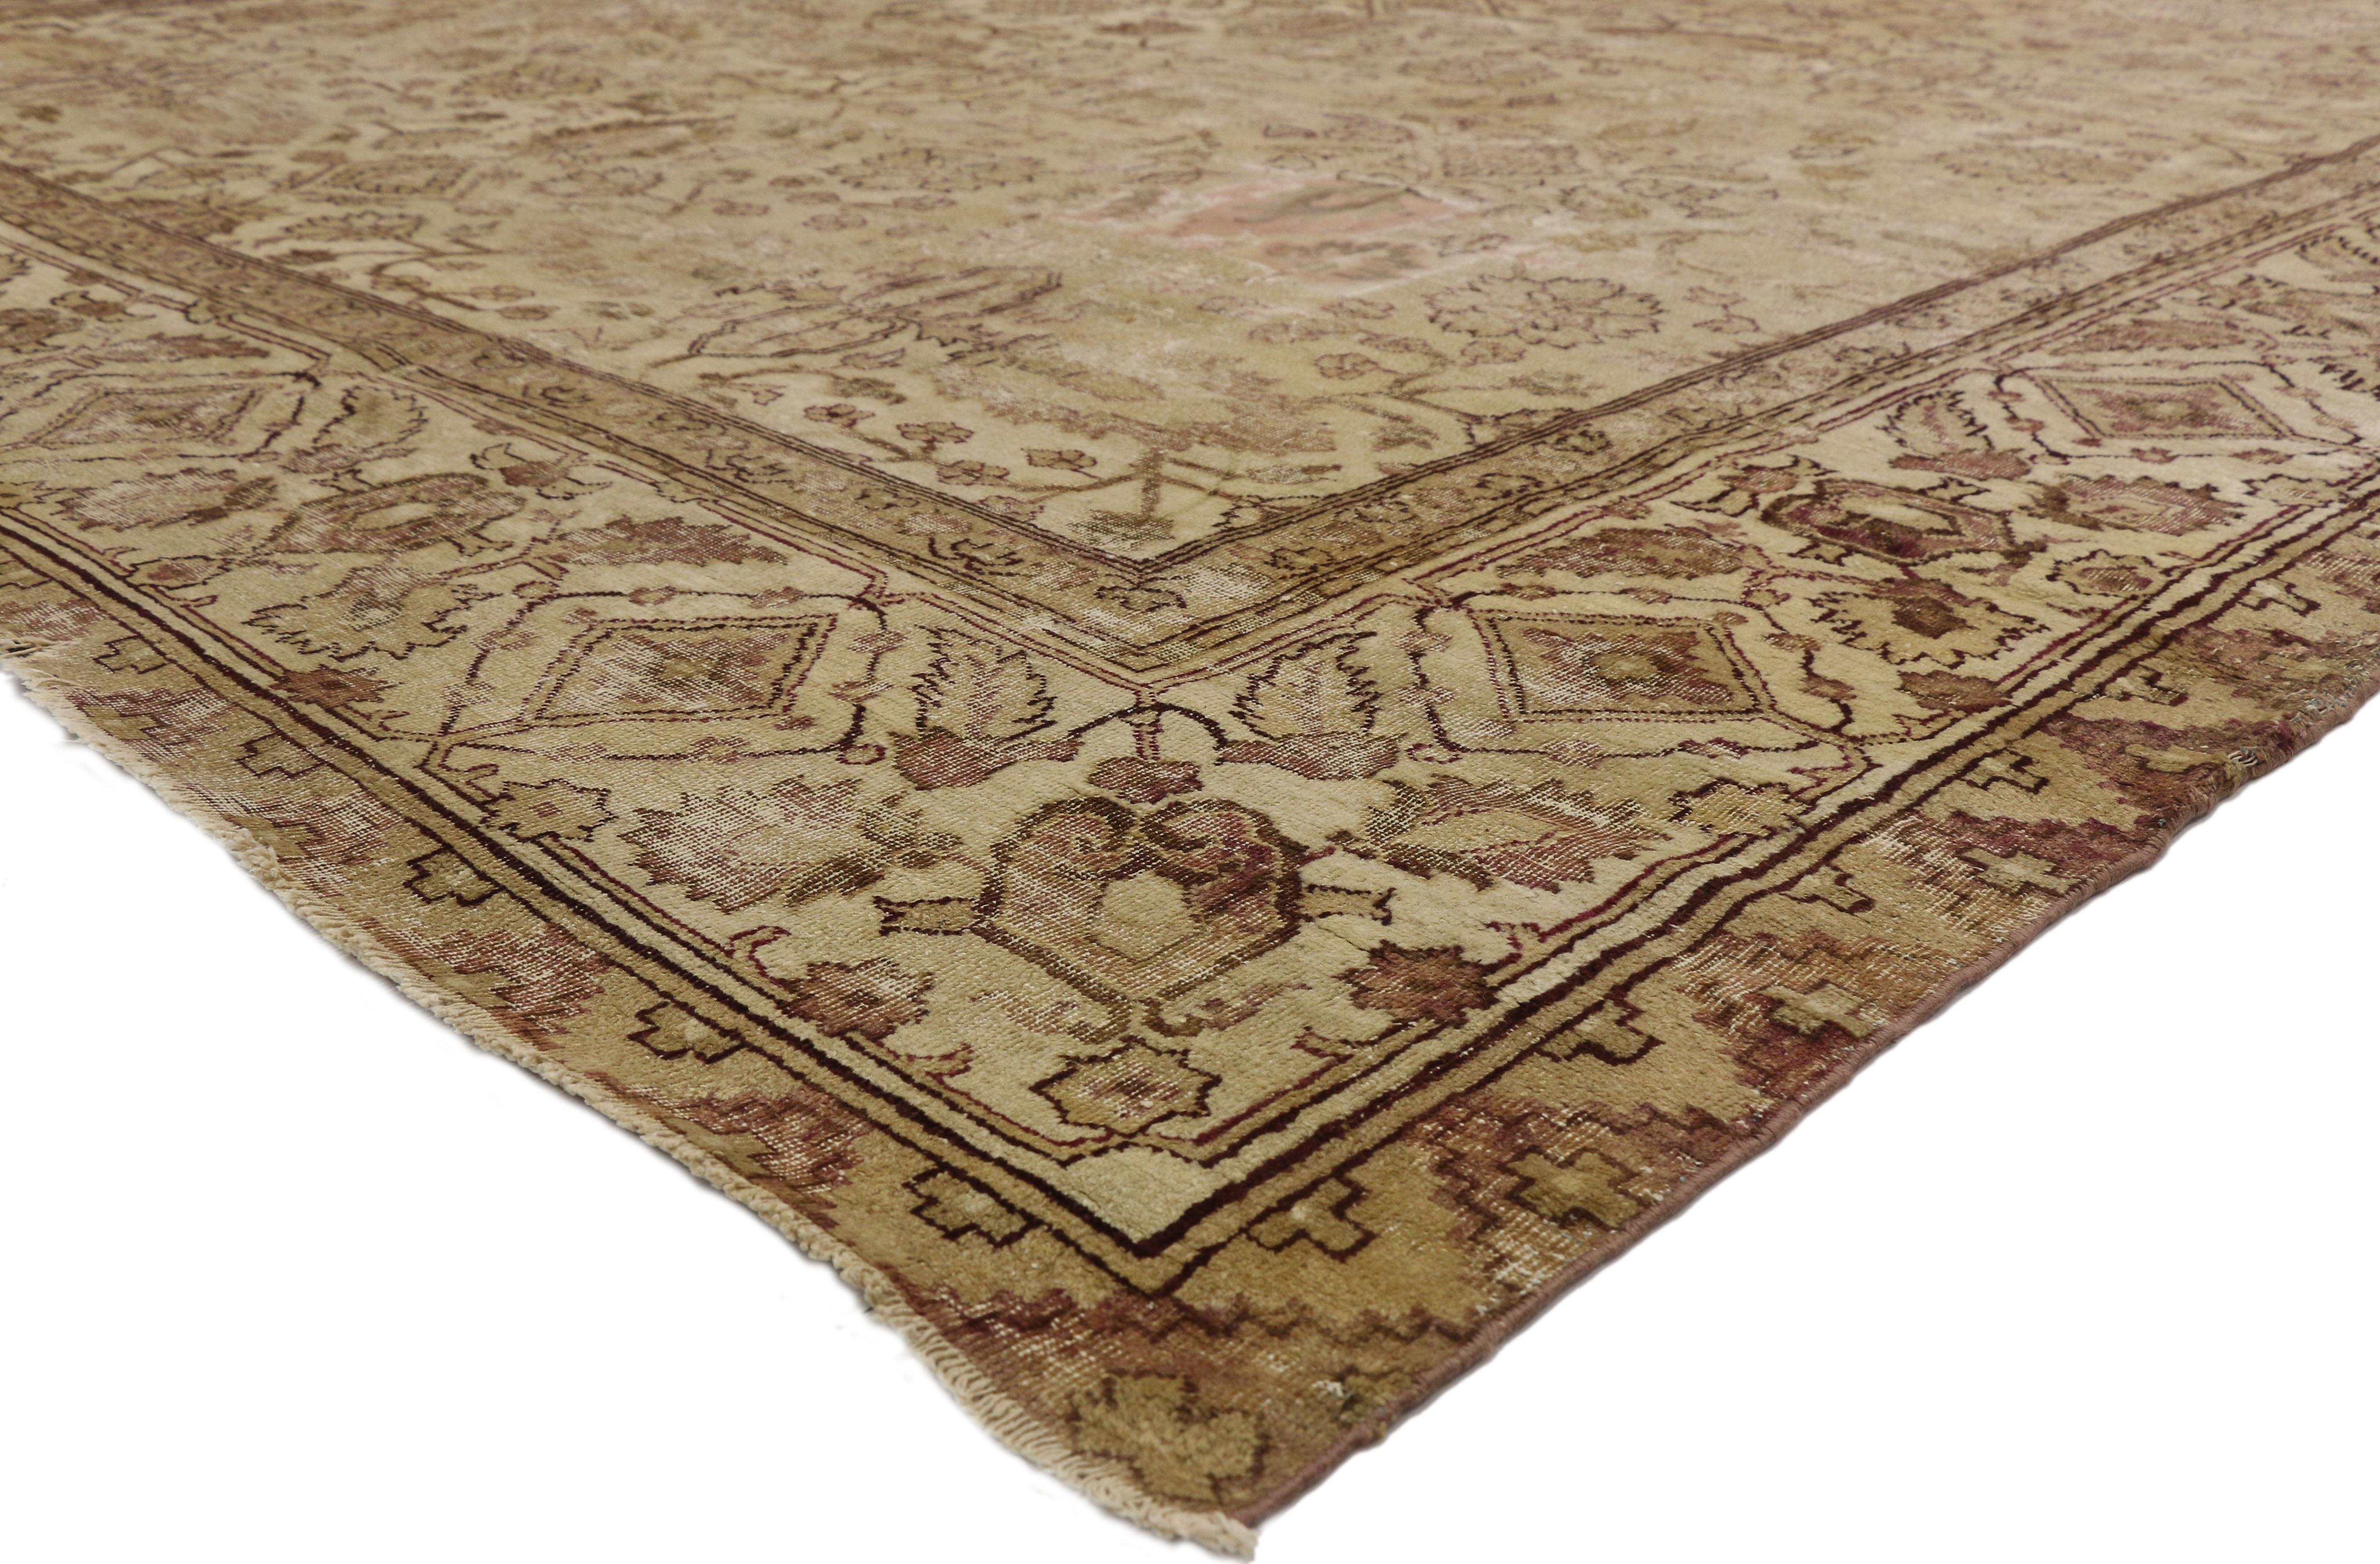 74351 Distressed Antique Indian Agra Palace Rug with Modern Industrial Style 11'04 X 14'00. Balancing a timeless floral design with traditional sensibility and a lovingly timeworn patina, this hand-knotted wool distressed antique Indian Agra palace